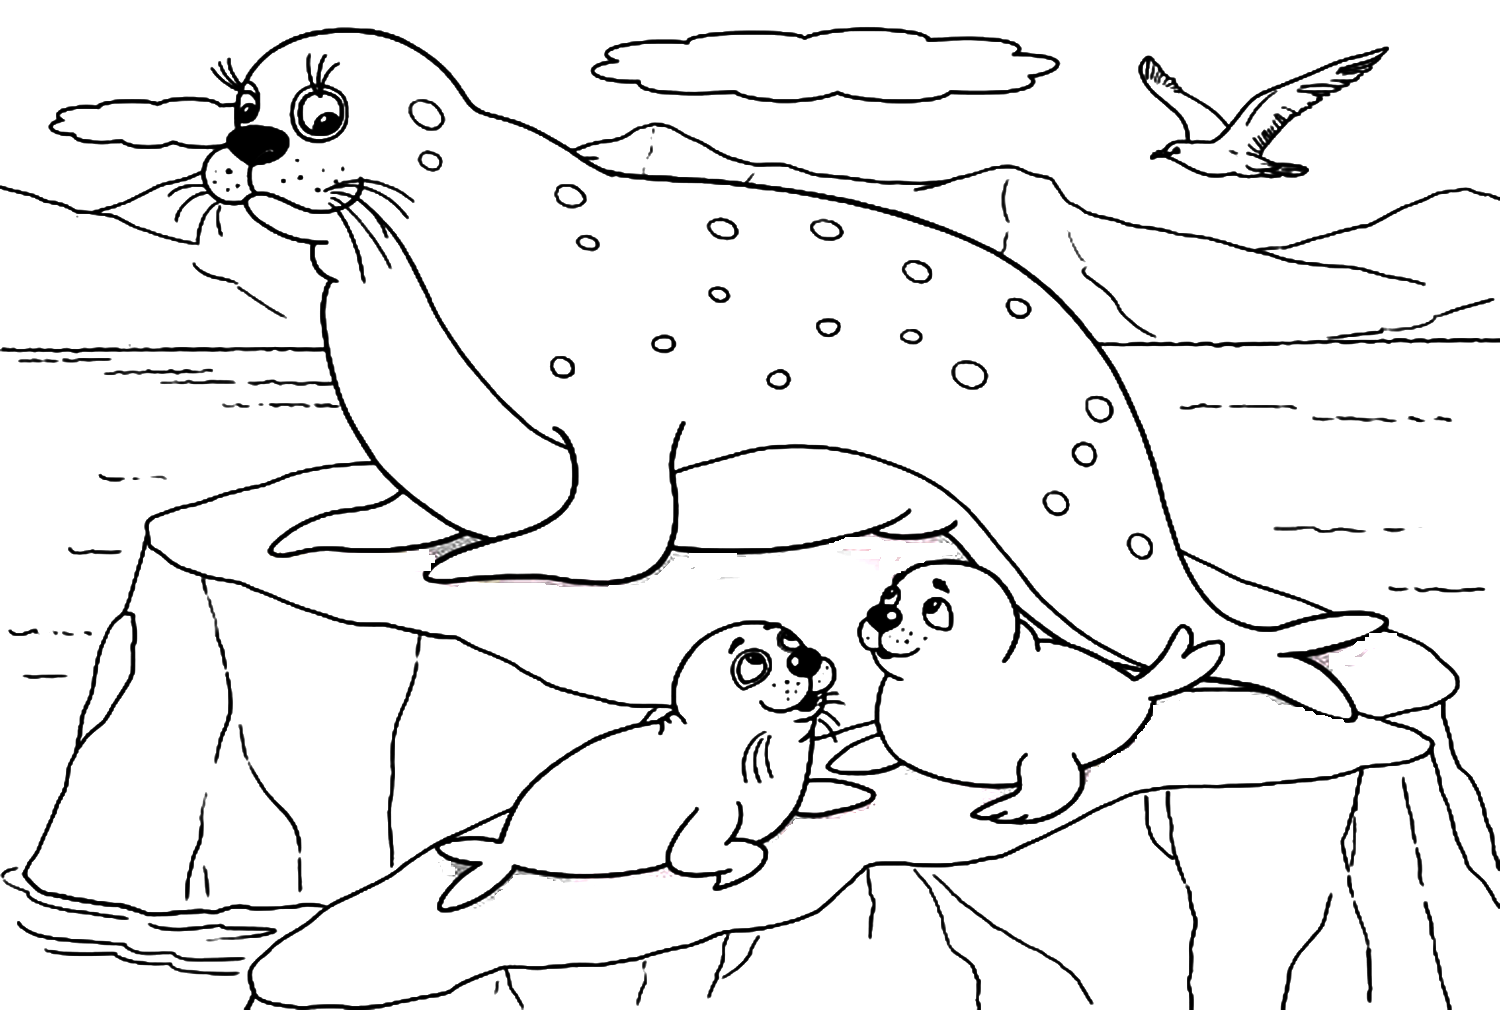 Seal Family from Animals